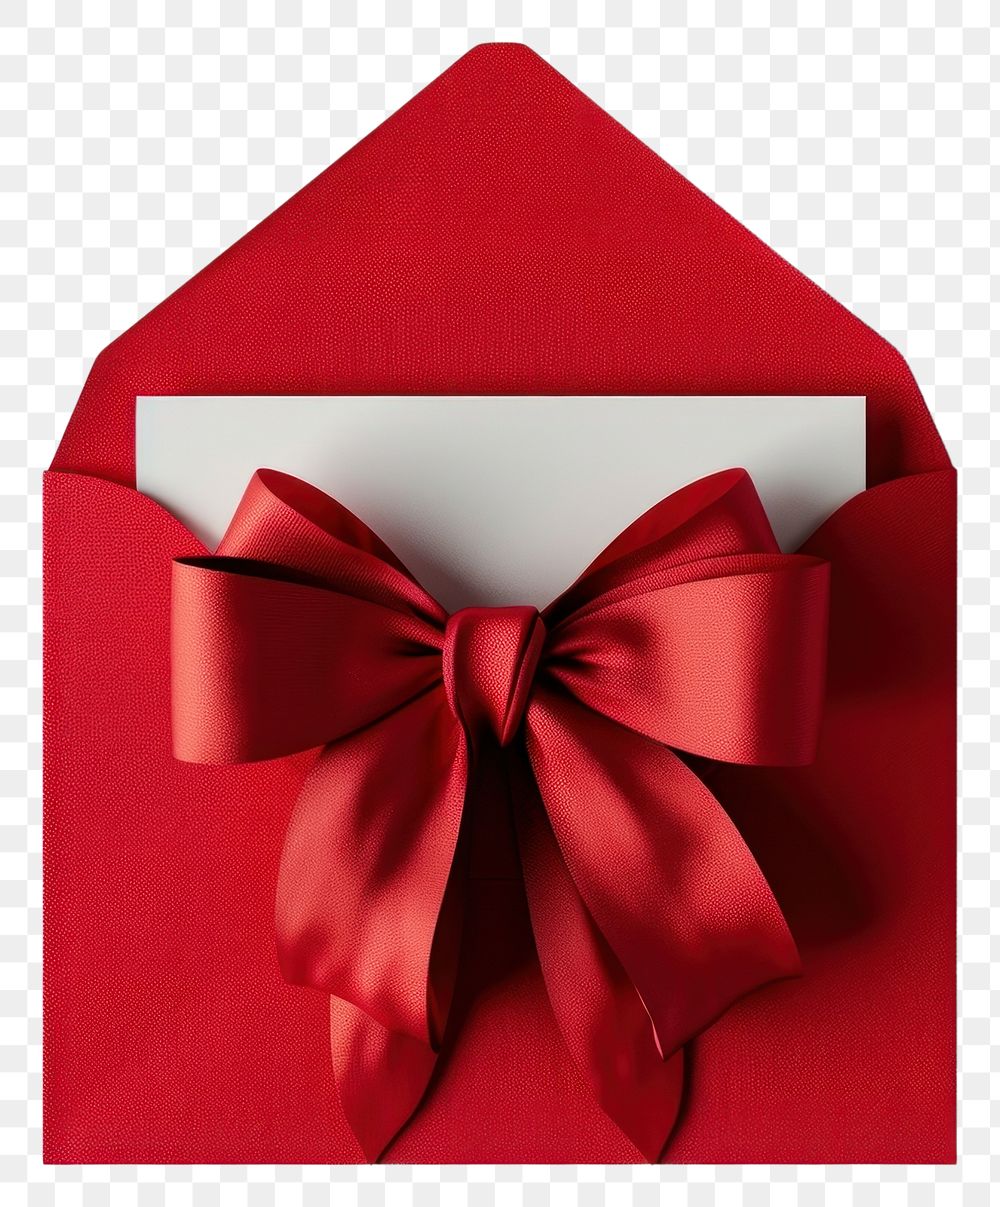 PNG 3D render of gift idea card with red bow and ribbon in red envelop celebration anniversary decoration.